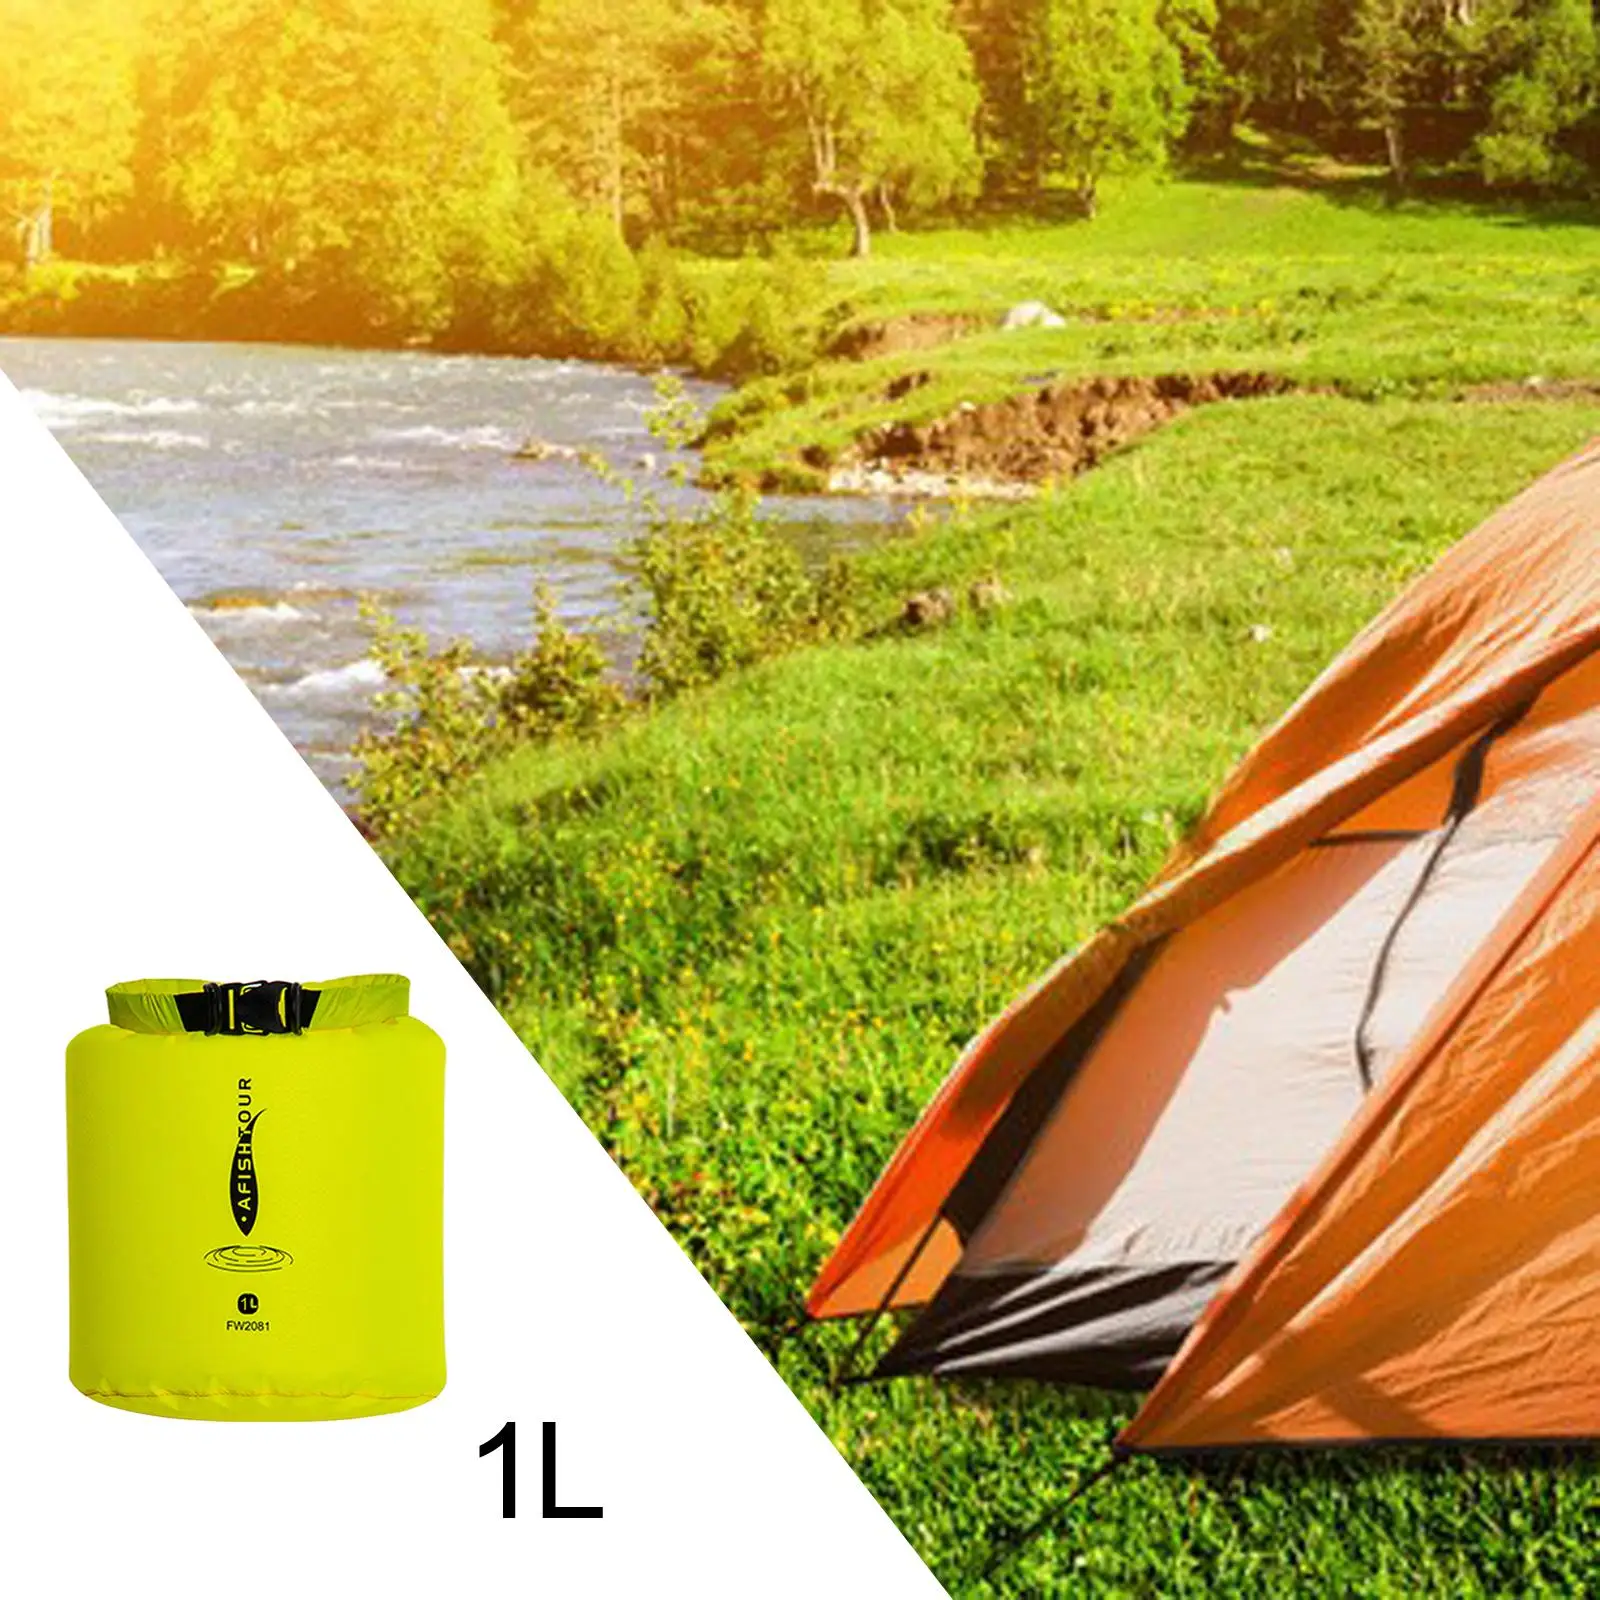 70D Nylon Cloth Waterproof Dry Bag Sundries Storage Bags Roll Top Dry Sack Pouch for Rafting Fishing Sailing Boating Outdoor